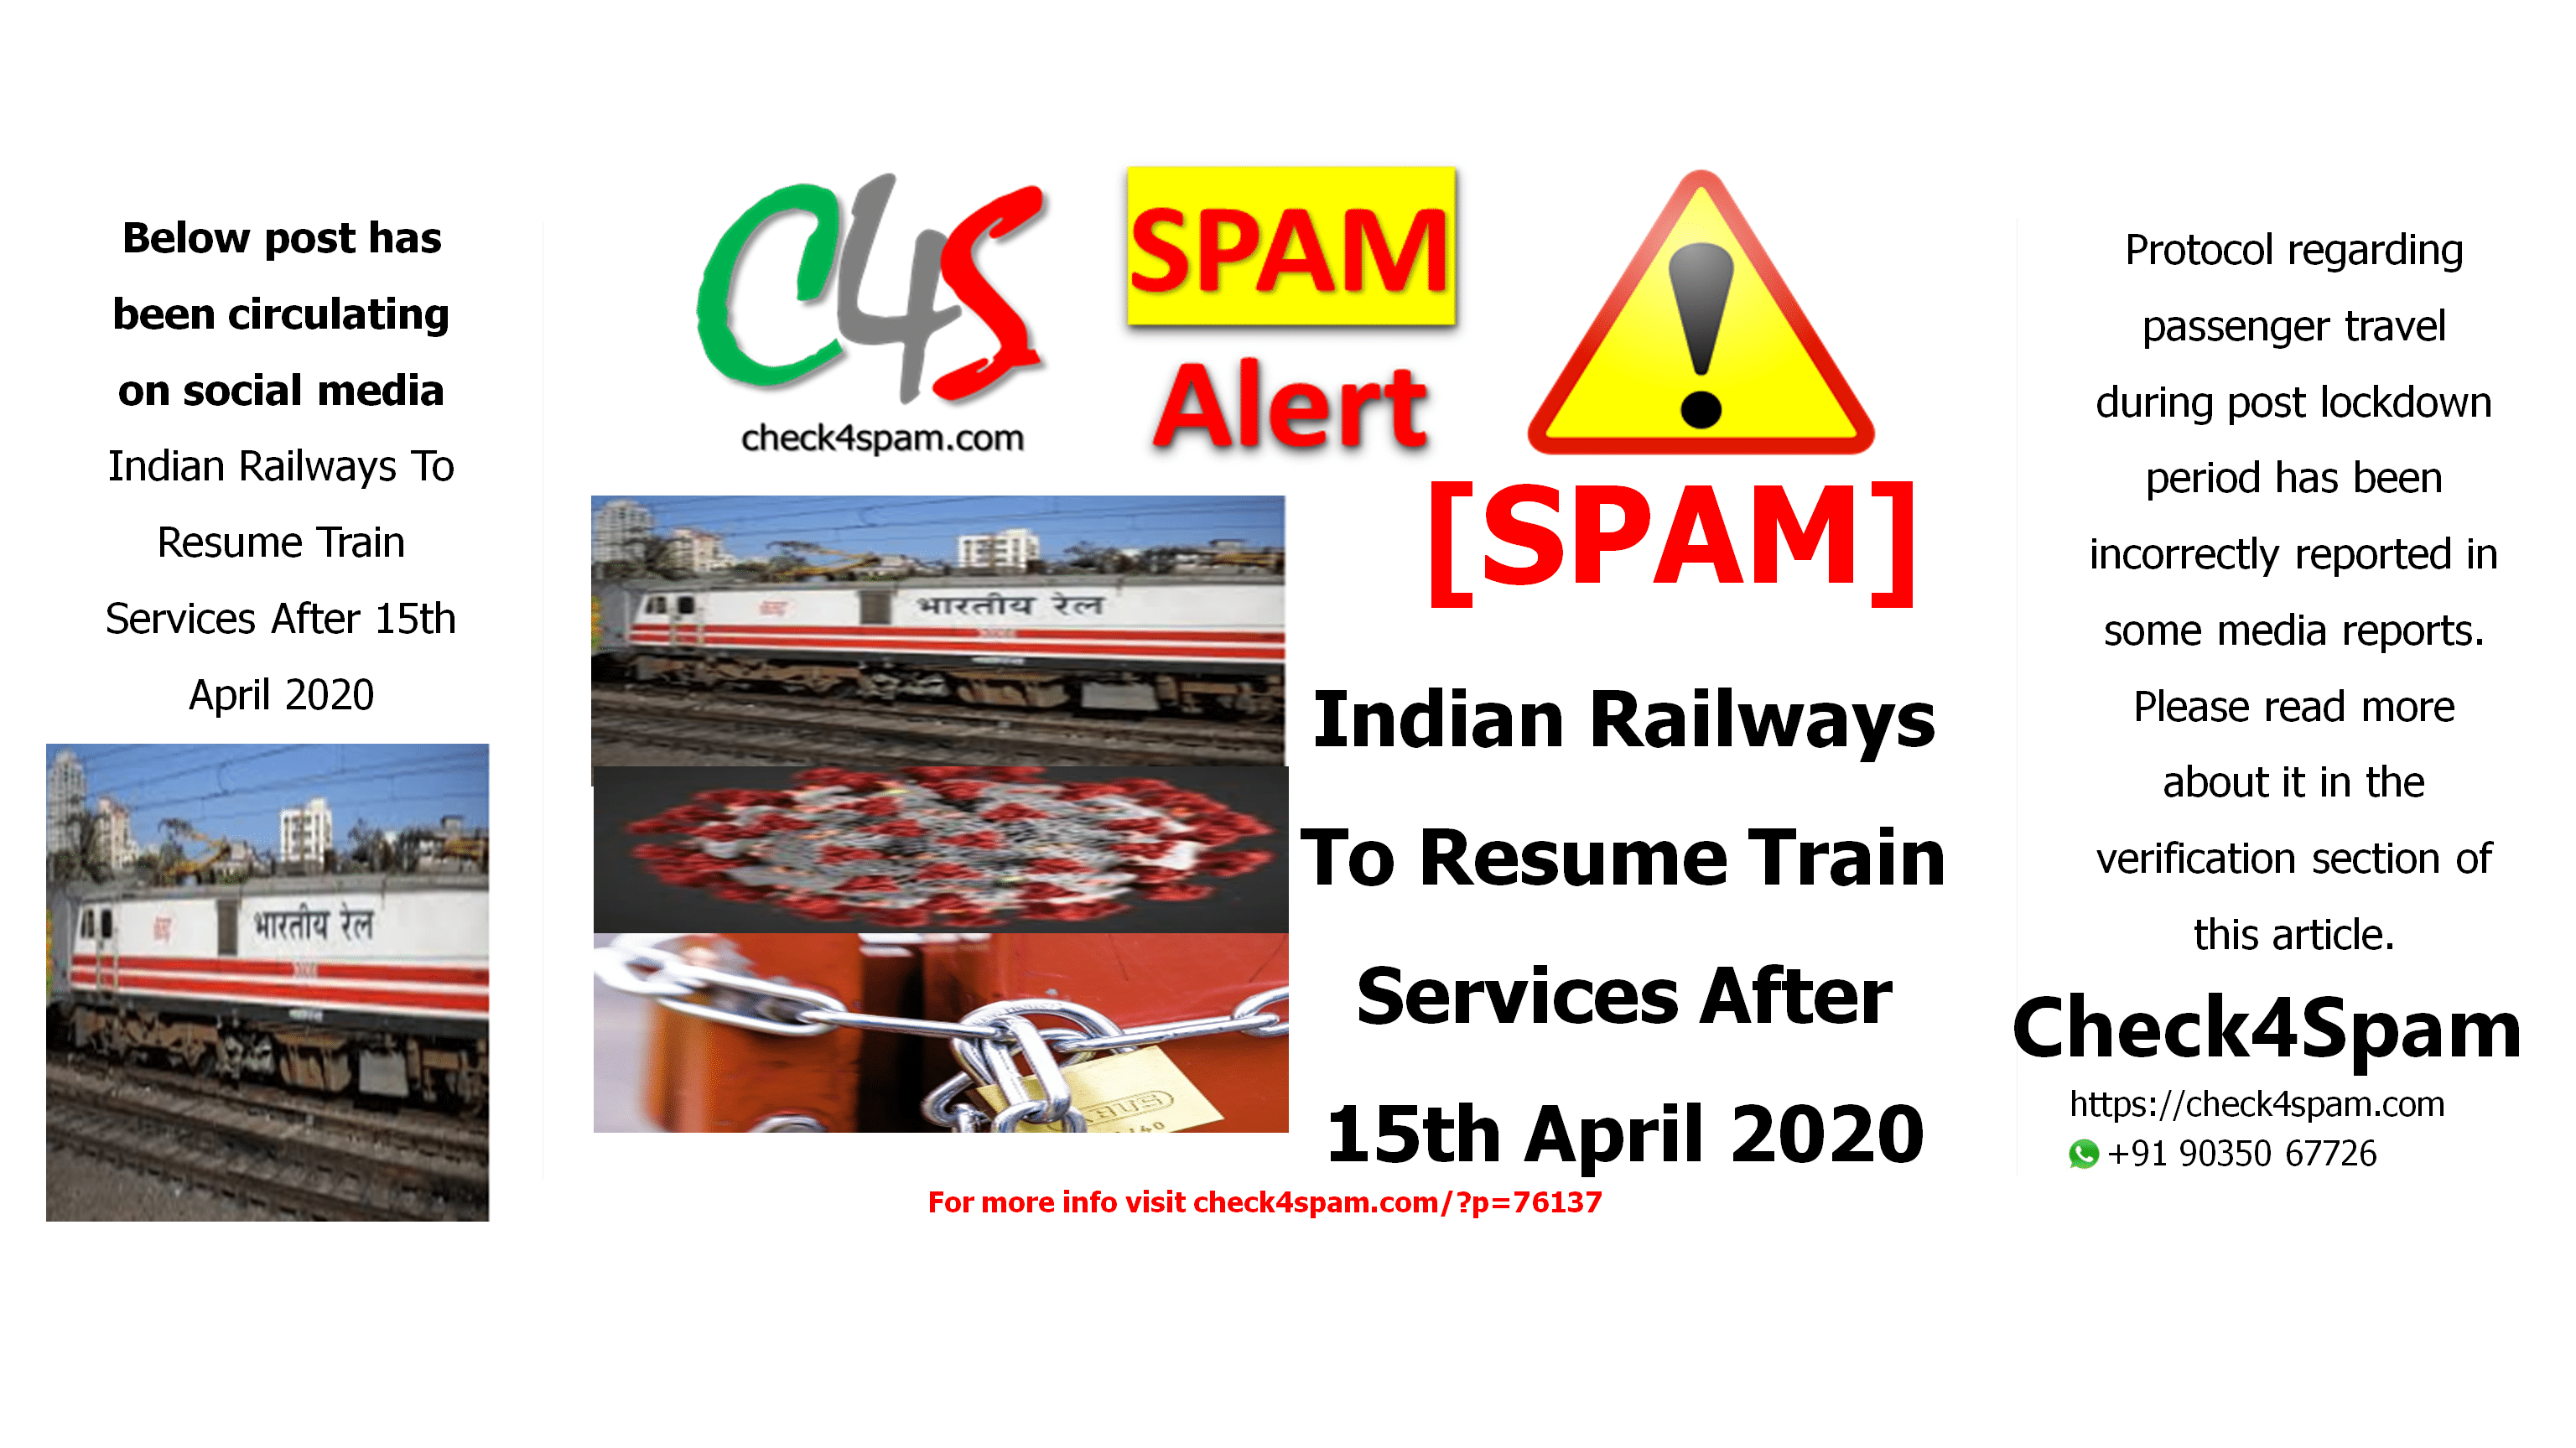 Indian Railways To Resume Train Services After 15th April 2020